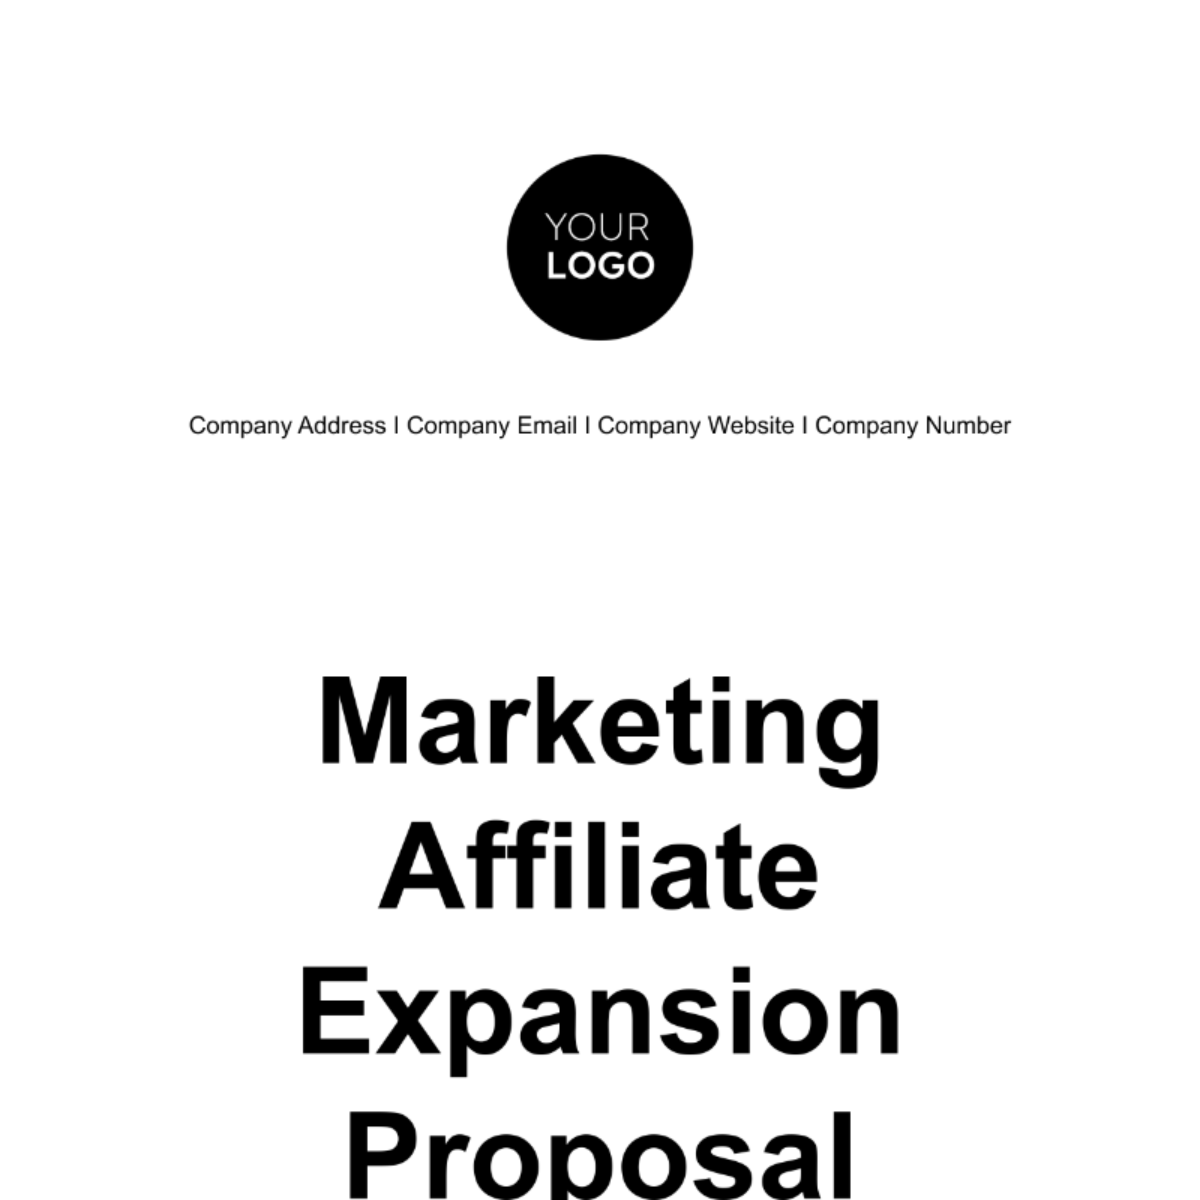 Free Marketing Affiliate Expansion Proposal Template